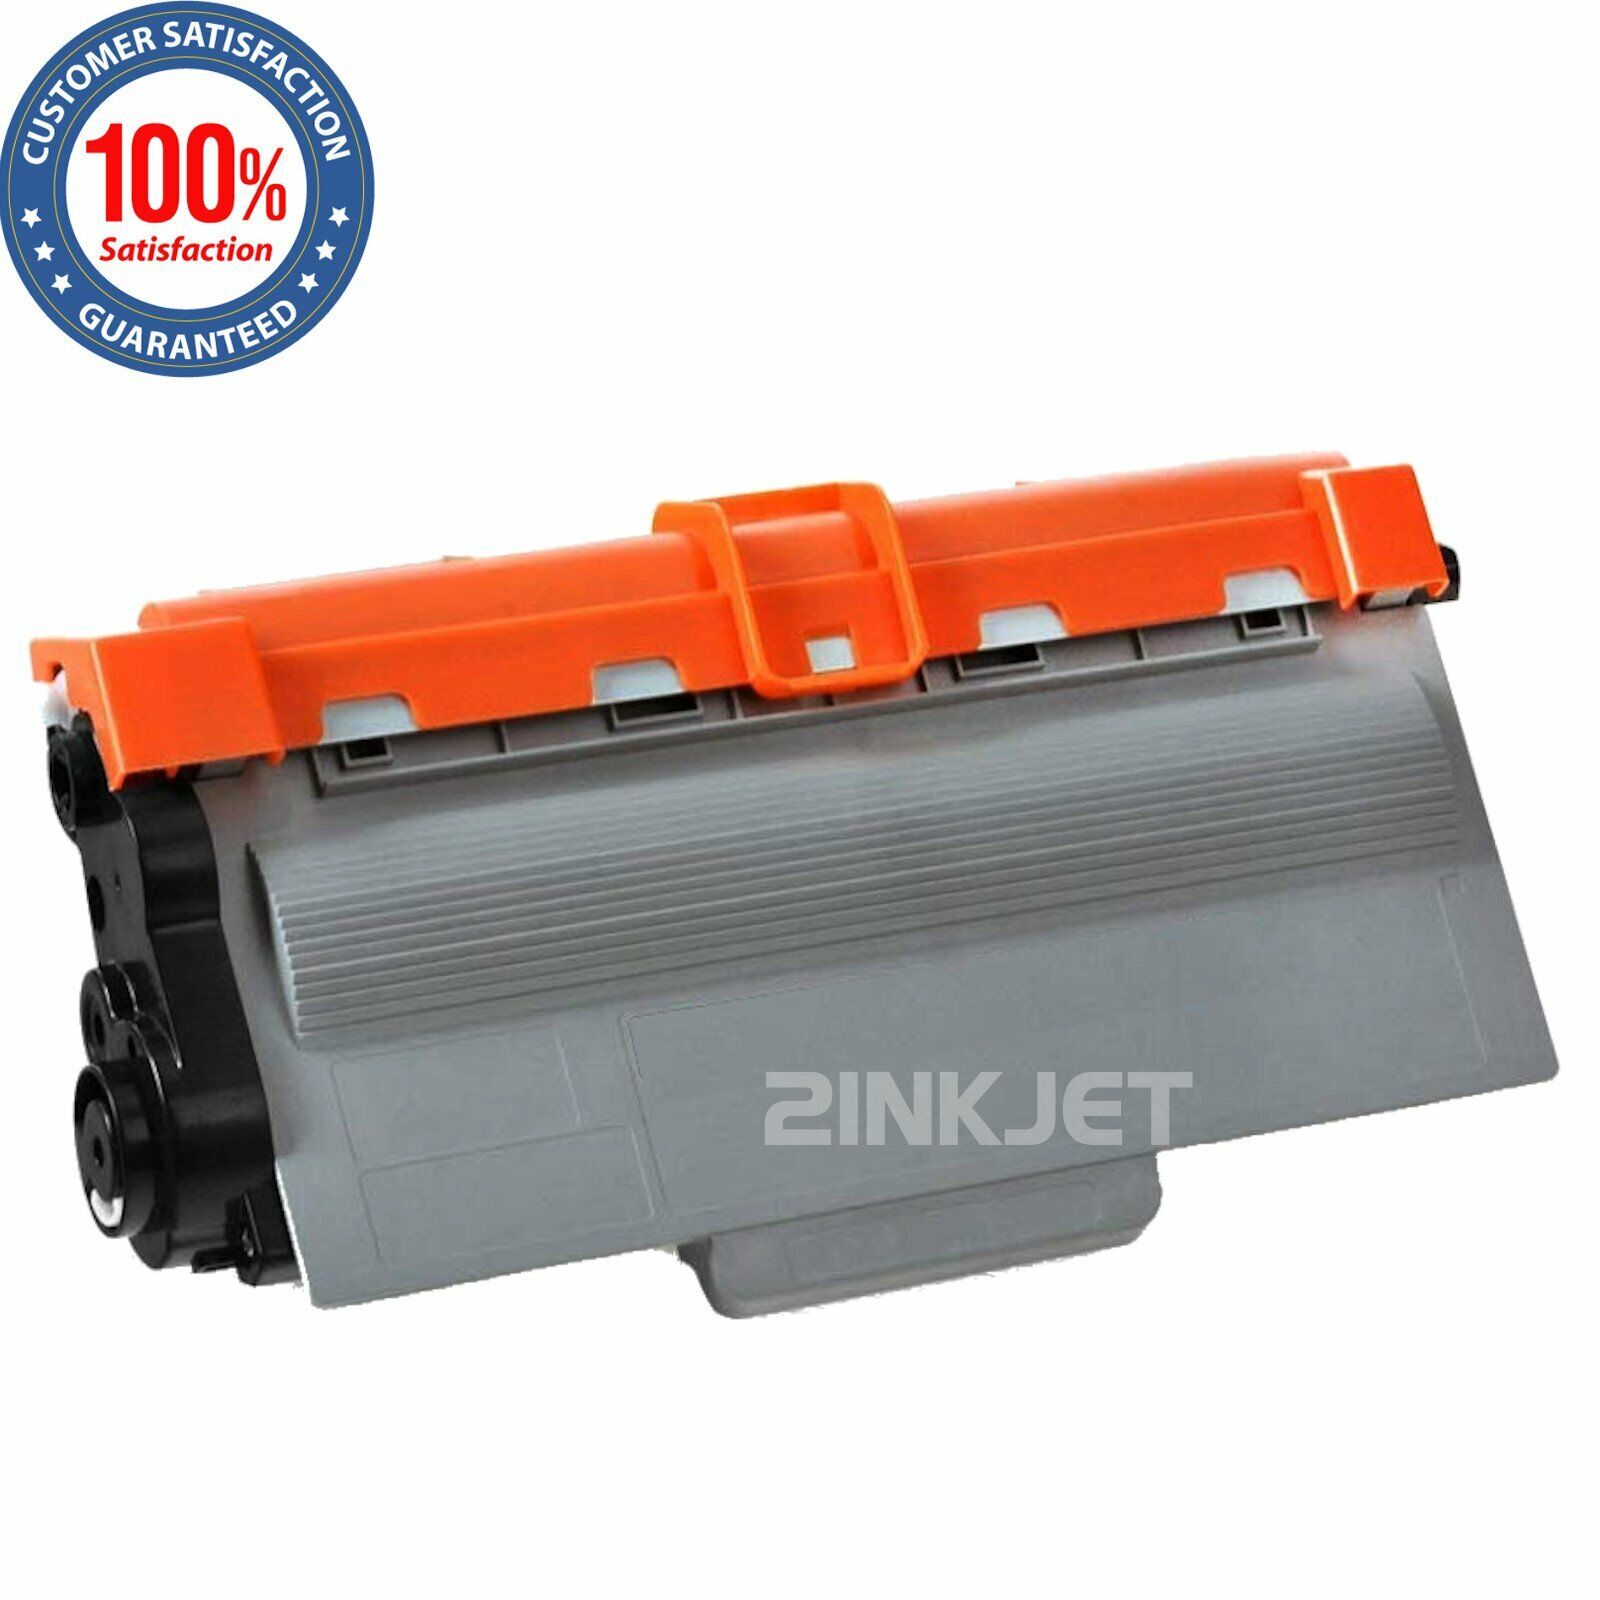 TN750 Toner Cartridge DR720 Drum For Brother MFC-8710DW HL-5450DN DCP-8150DN